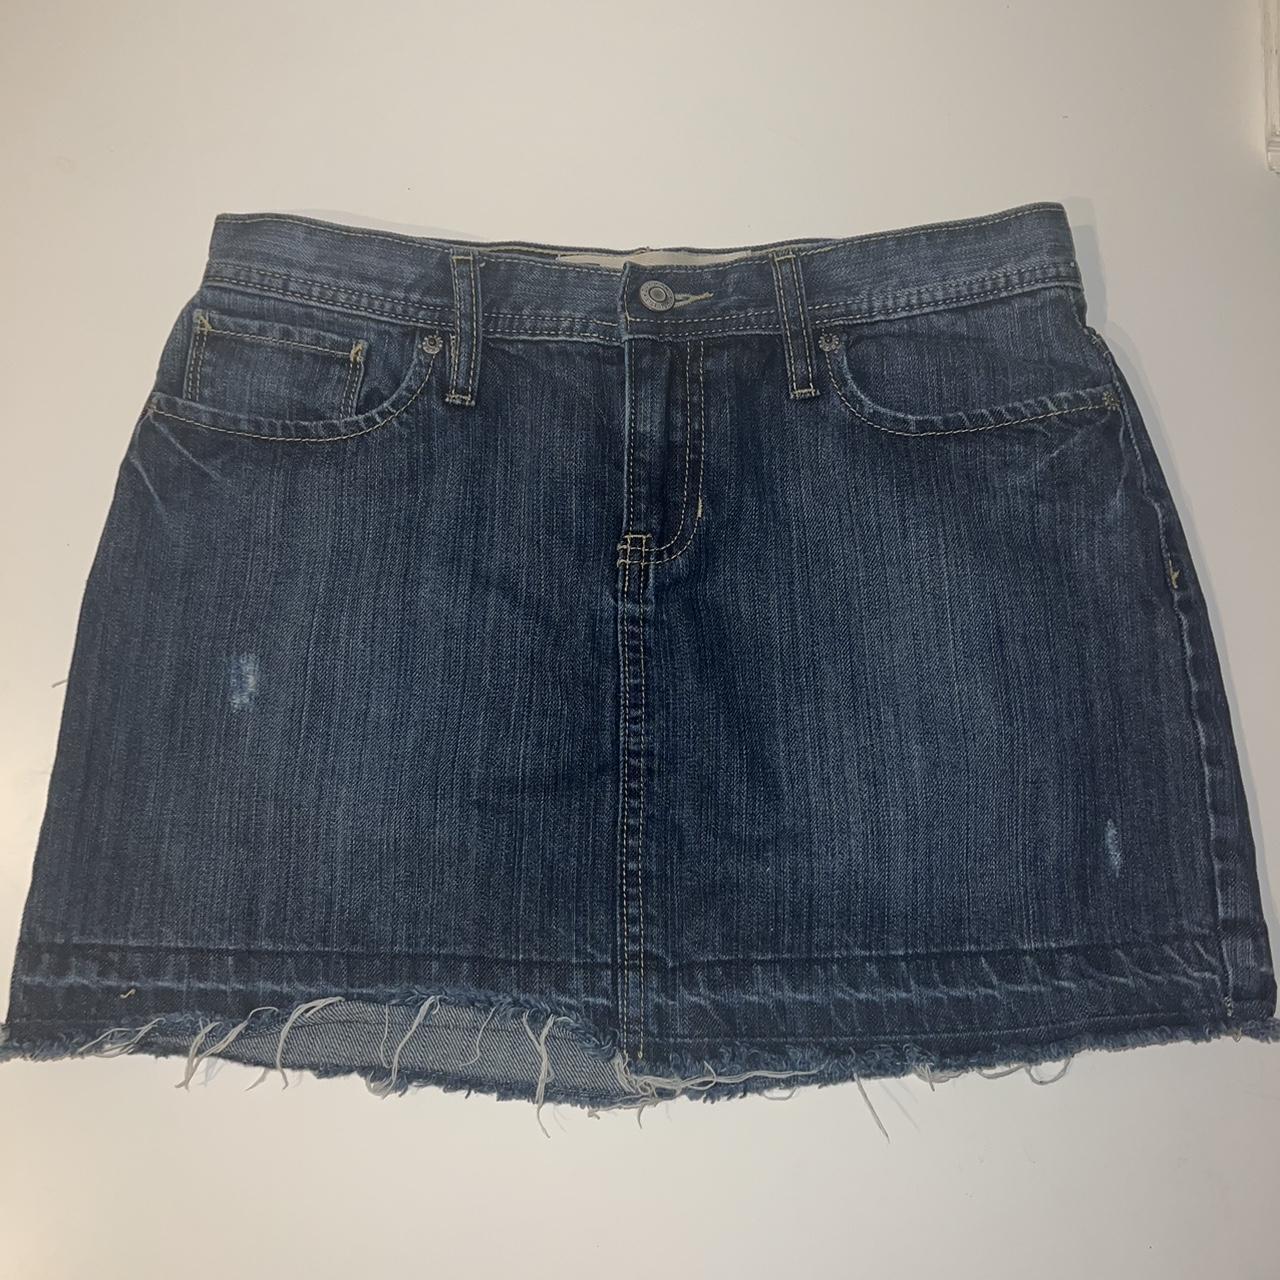 jean mini skirt from Gap. size 4. im 5’6 and its a... - Depop